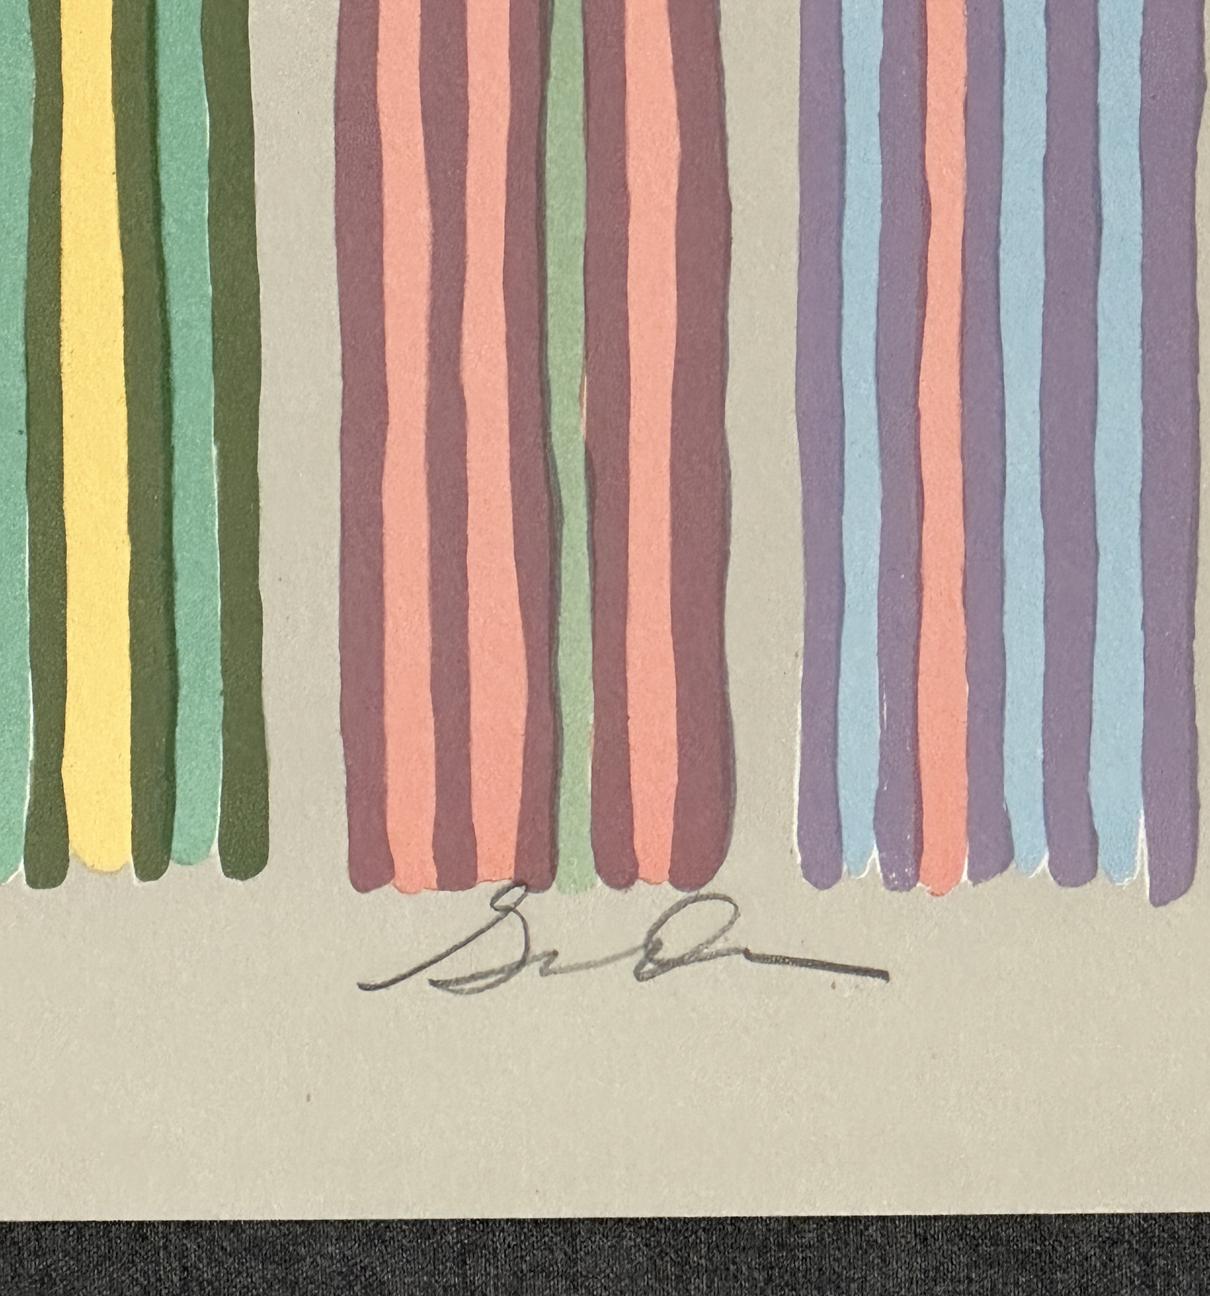 Gene Davis
Royal Curtain - 1980
Print - Silkscreen, on Arches archival paper   30'' x 22'' inches
Edition: signed in pencil and marked 180/250

Unframed 

Known for his dazzling and immediately recognizable stripe paintings, Gene Davis emerged from